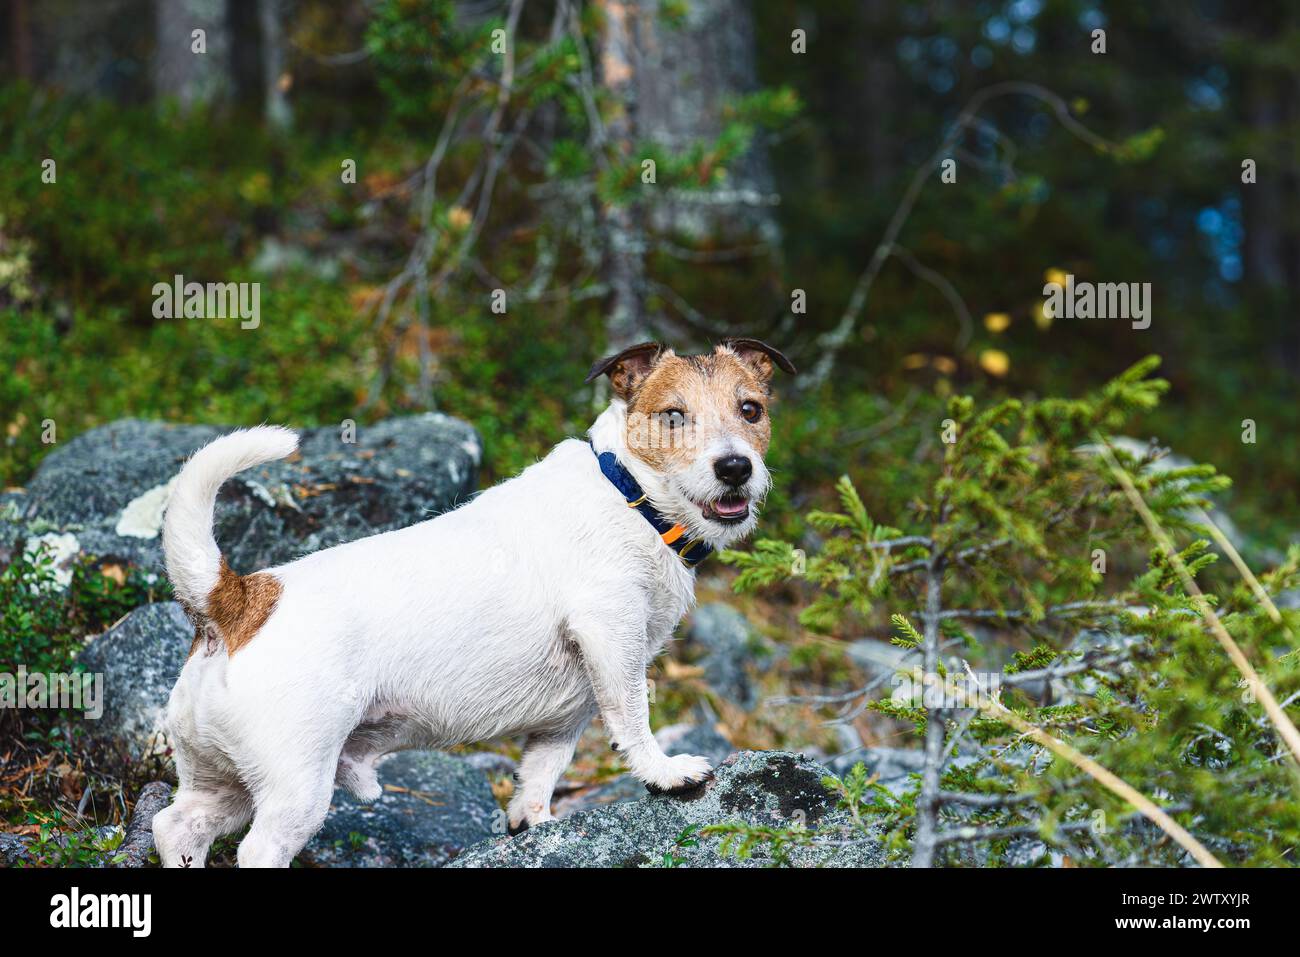 Dog at morning walk in forest hiking in wild nature Stock Photo